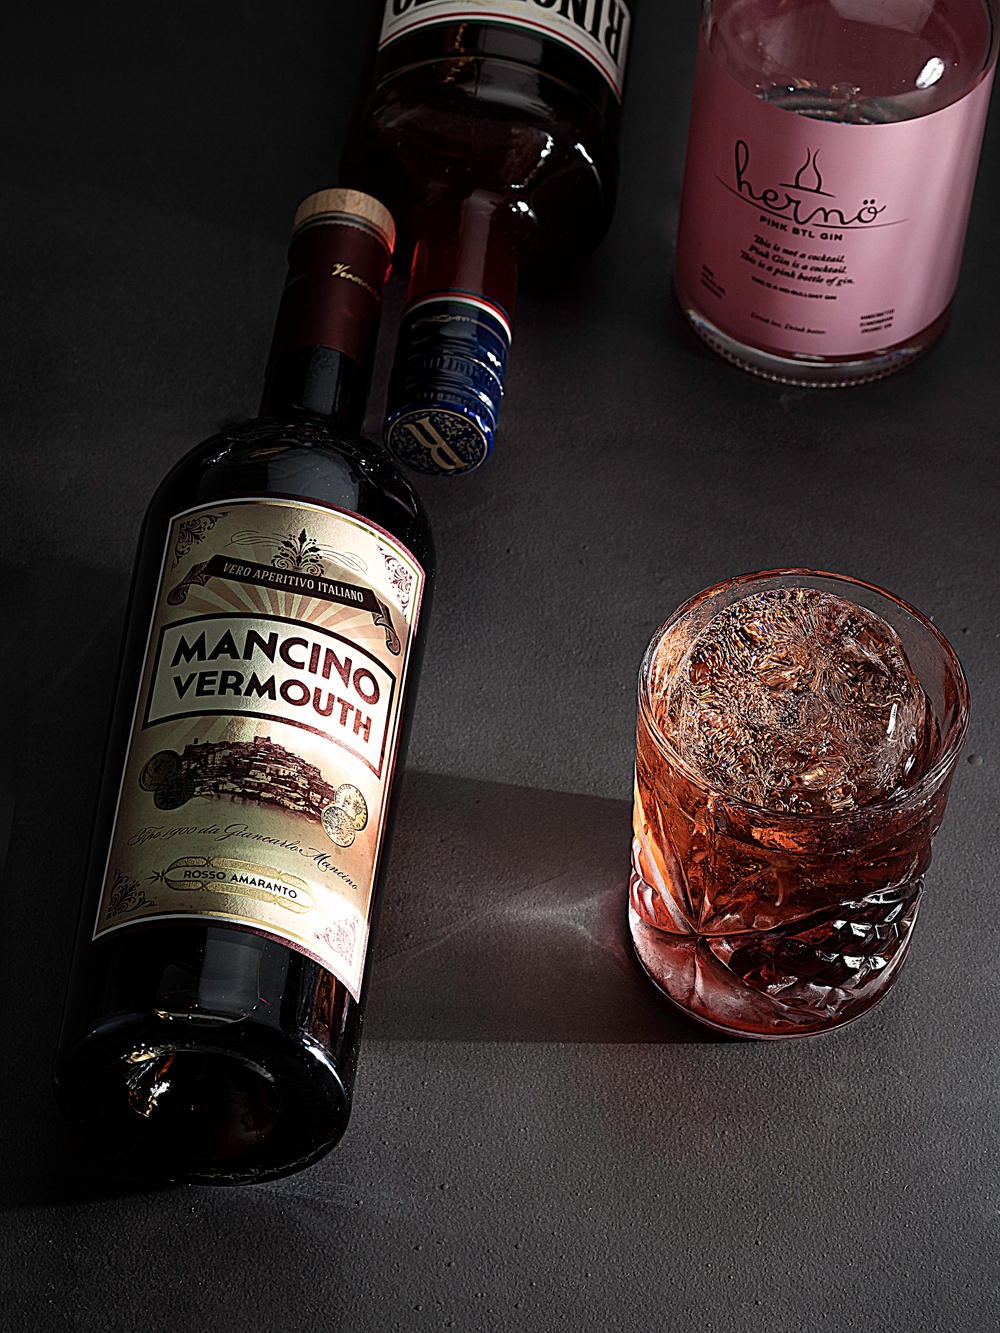 INTERNATIONAL NEGRONI WEEK DAY 5. Our tip of the day comes from Johan Wester, distiller at Hernö Gin. He suggests a Negroni containing Hernö Pink BTL Gin, Mancino Rosso Amaranto and Rinomato. Hernö Pink BTL Gin, our juniper forward London Dry Gin with a hint of rose and strawberries, will balance up the sweetness of the vermouth. Together with Rinomato the combination is just perfect. 

The recipe? Coming up:
30 ml Hernö Pink BTL Gin
30 ml Mancino Rosso Amaranto
30 ml Rinomato

Pour Hernö Pink BTL Gin, Mancino Rosso Amaranto and Rinomato into a stirring glass. Stir and then strain the cocktail into an oldfashioned glass or whisky glass filled with ice.